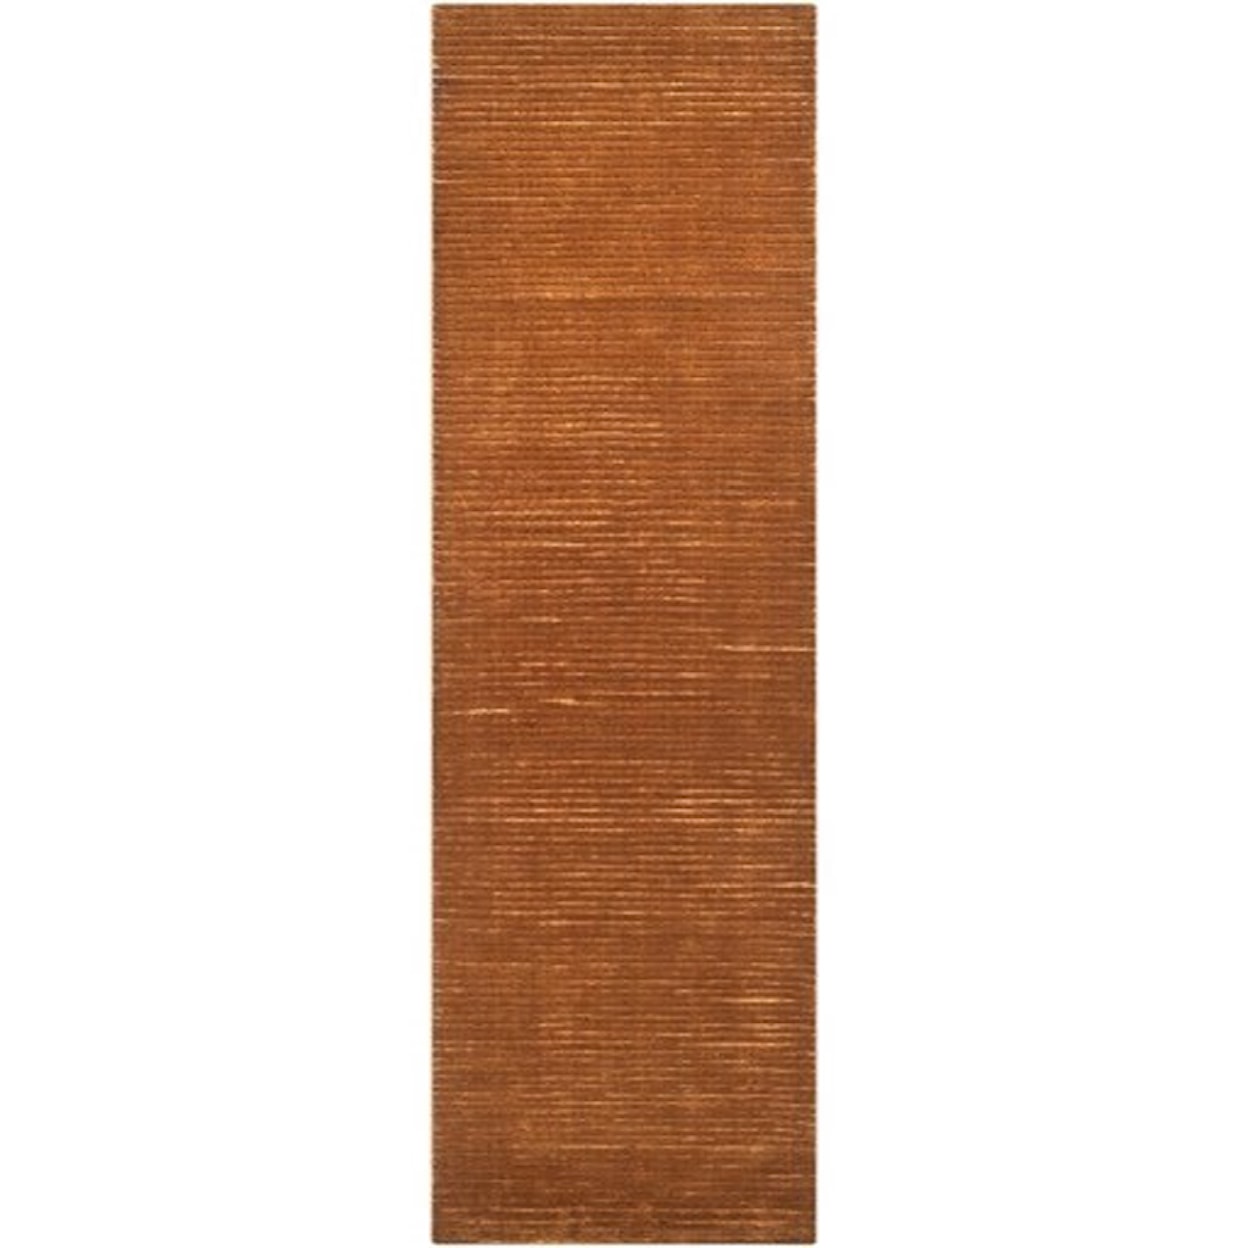 Ruby-Gordon Accents Parallel 2'6" x 8' Rug